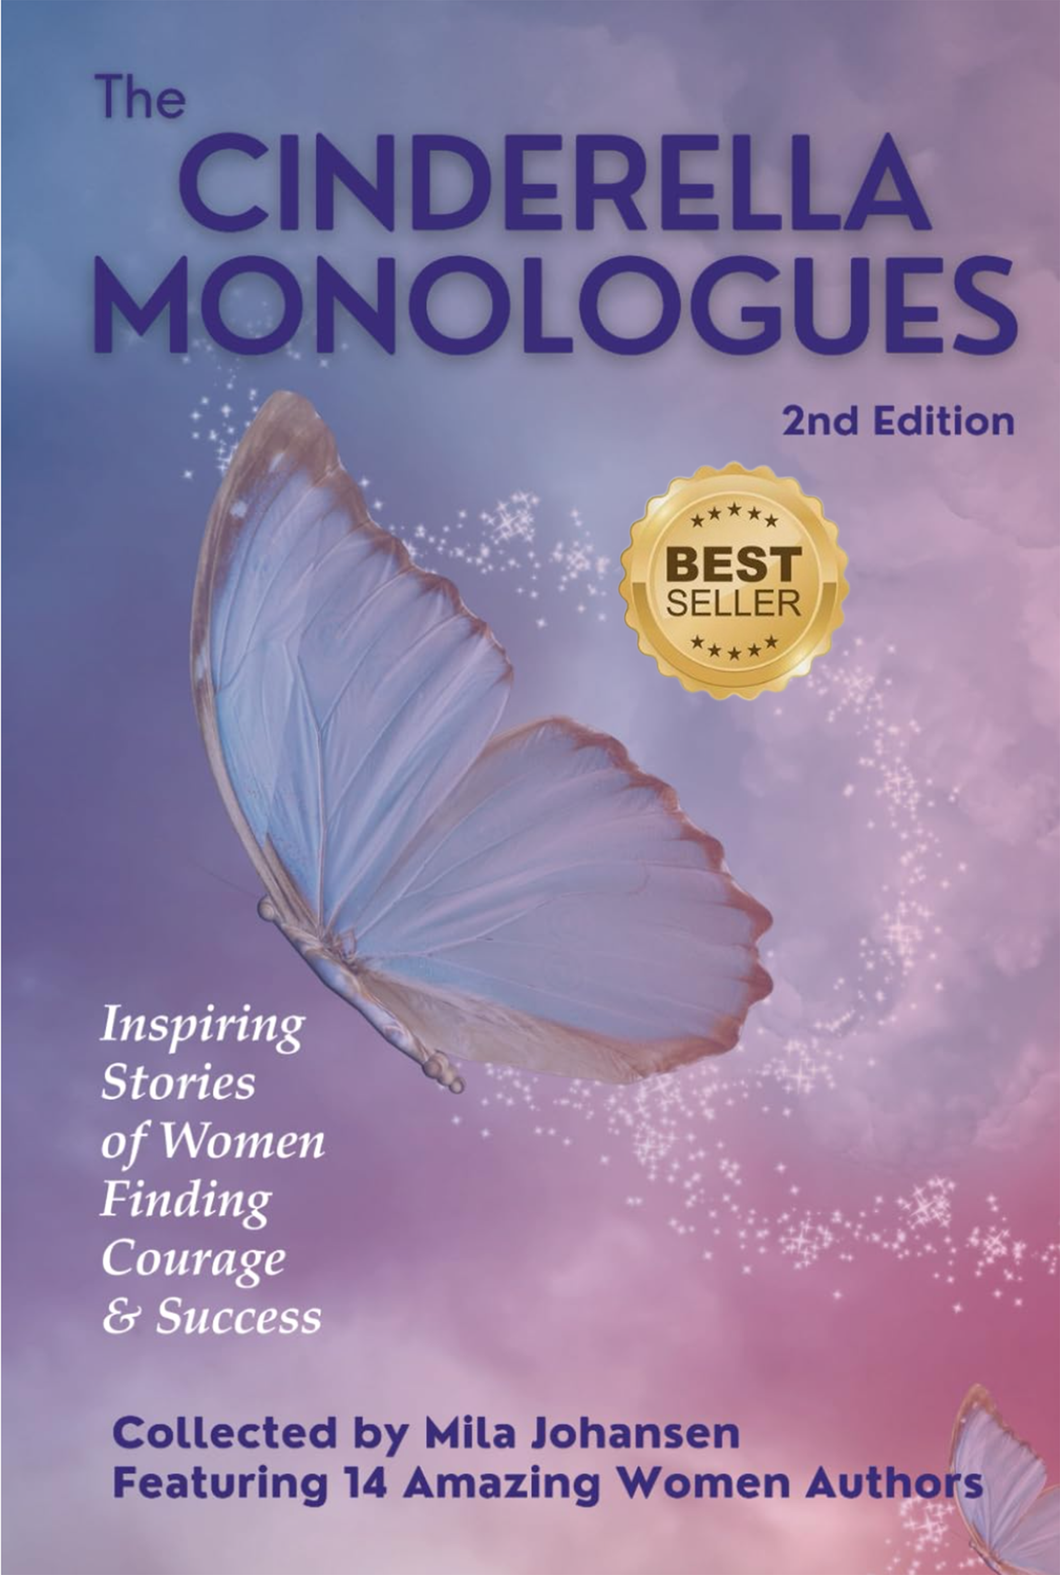 The Cinderella Monologues, 2nd Edition (Amazon BESTSELLER!!)Available Now!! Inspiring Stories of Women Finding Courage & Success